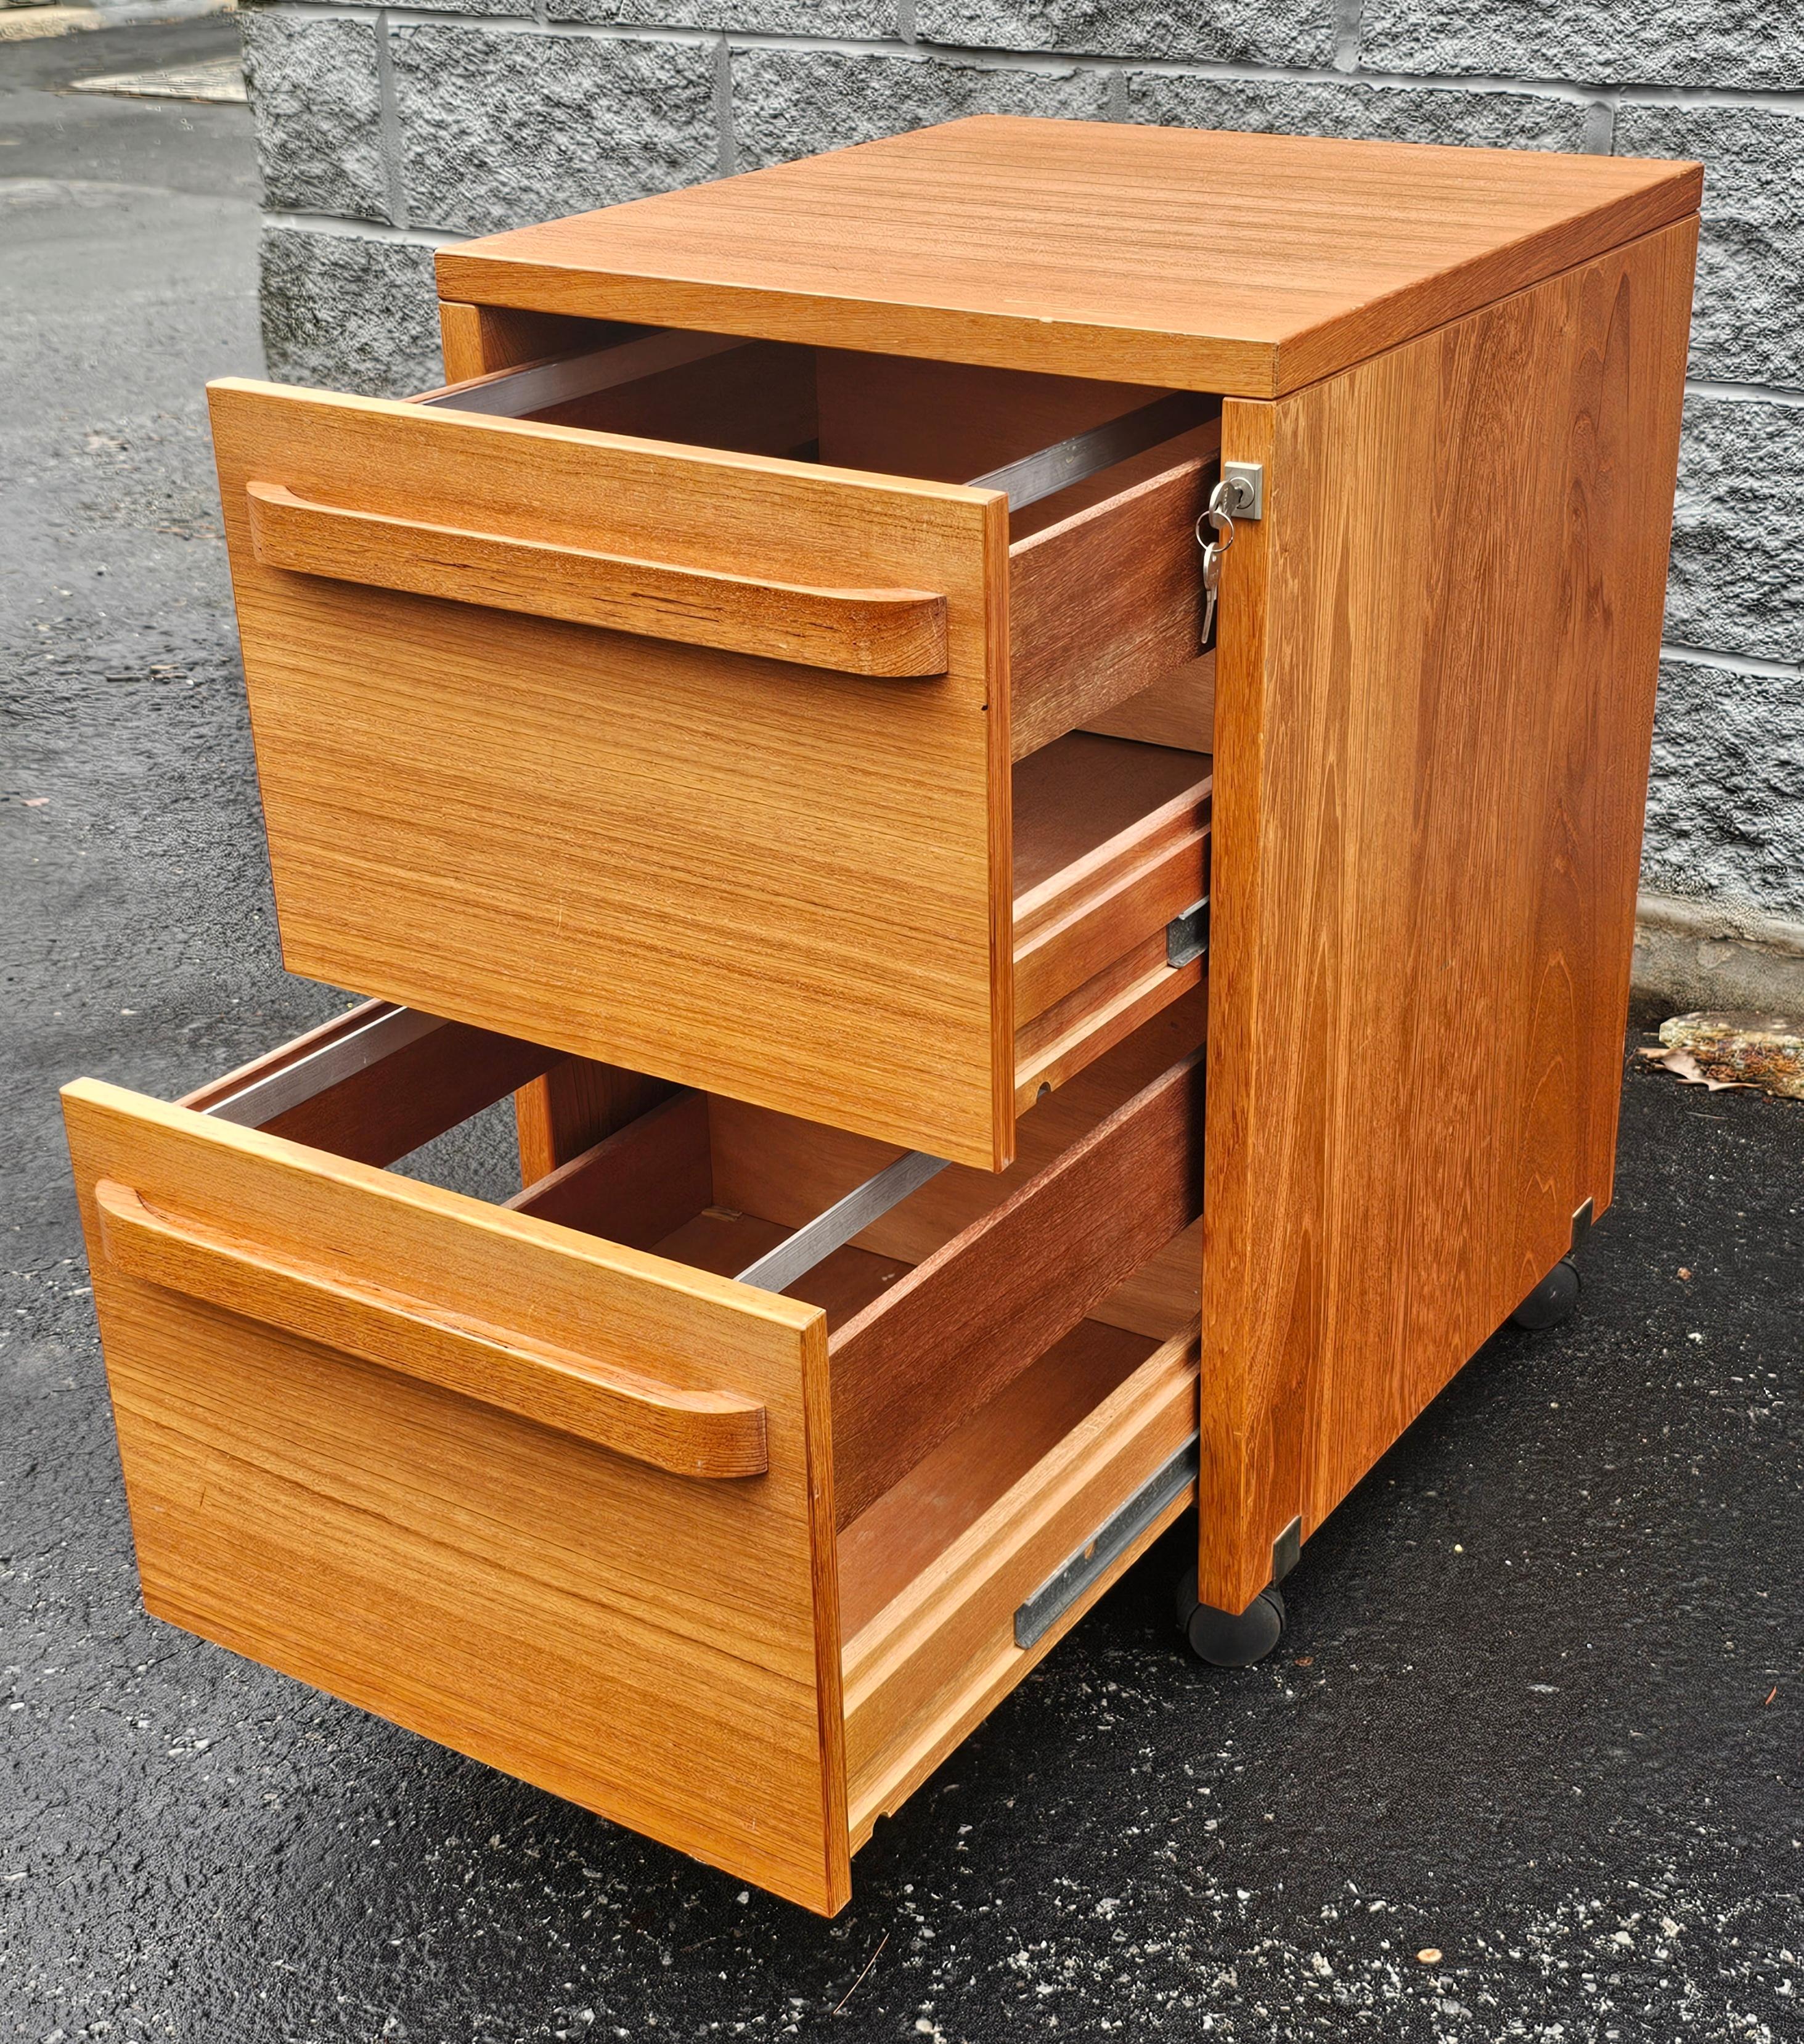 Mid-Century Scandinavian Modern Teak Two-Drawer Filing Cabinet with Lock on Wheels in great vintage condition. Adjustable for legal and letter size file holders. Measures 19